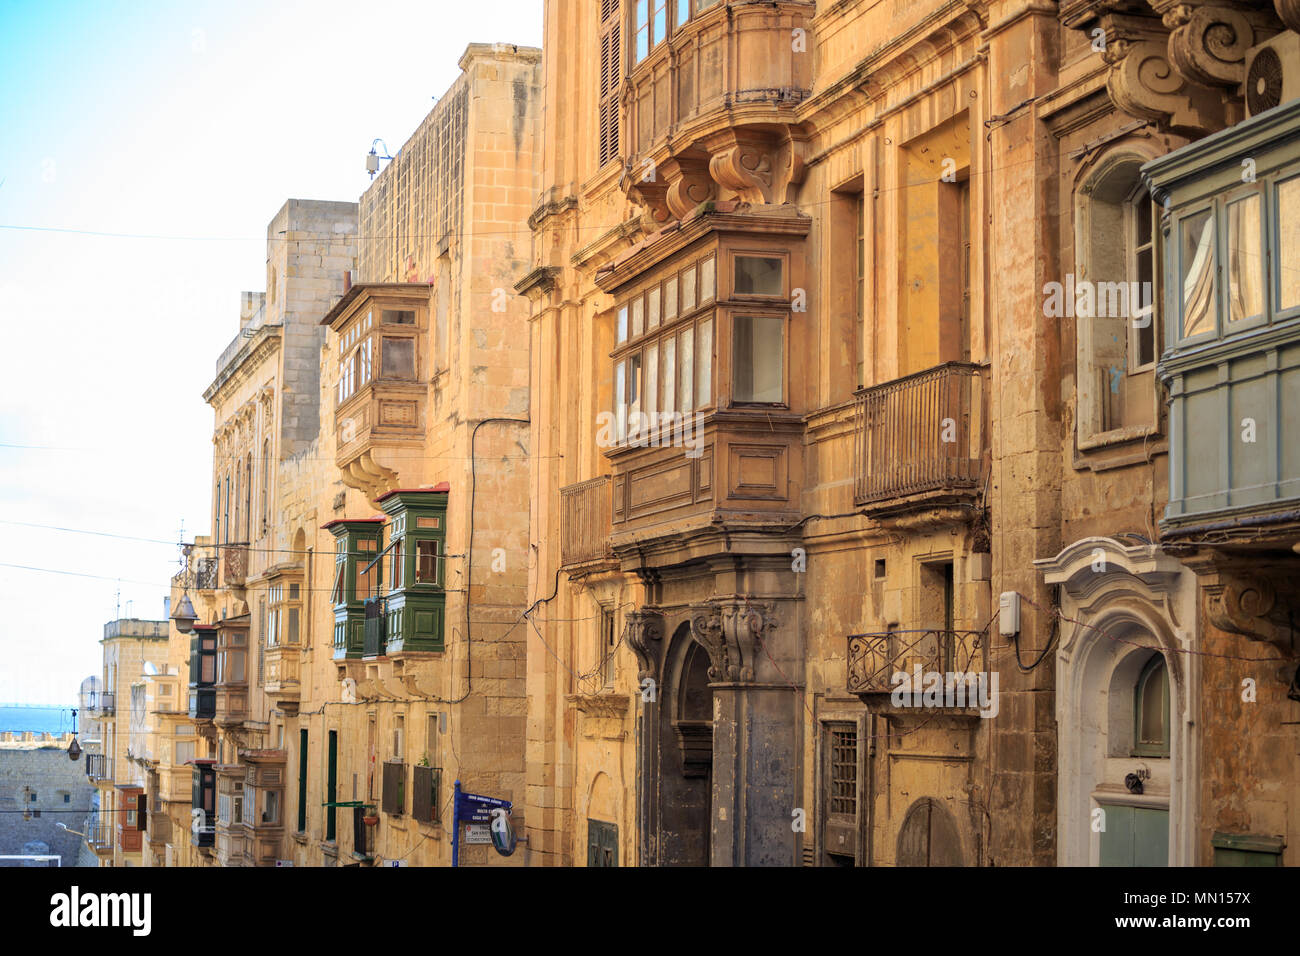 Malta, Valletta, traditional sandstone buildings with colorful wooden windows on covered balconies. Blue sky with clouds and sea background. Stock Photo